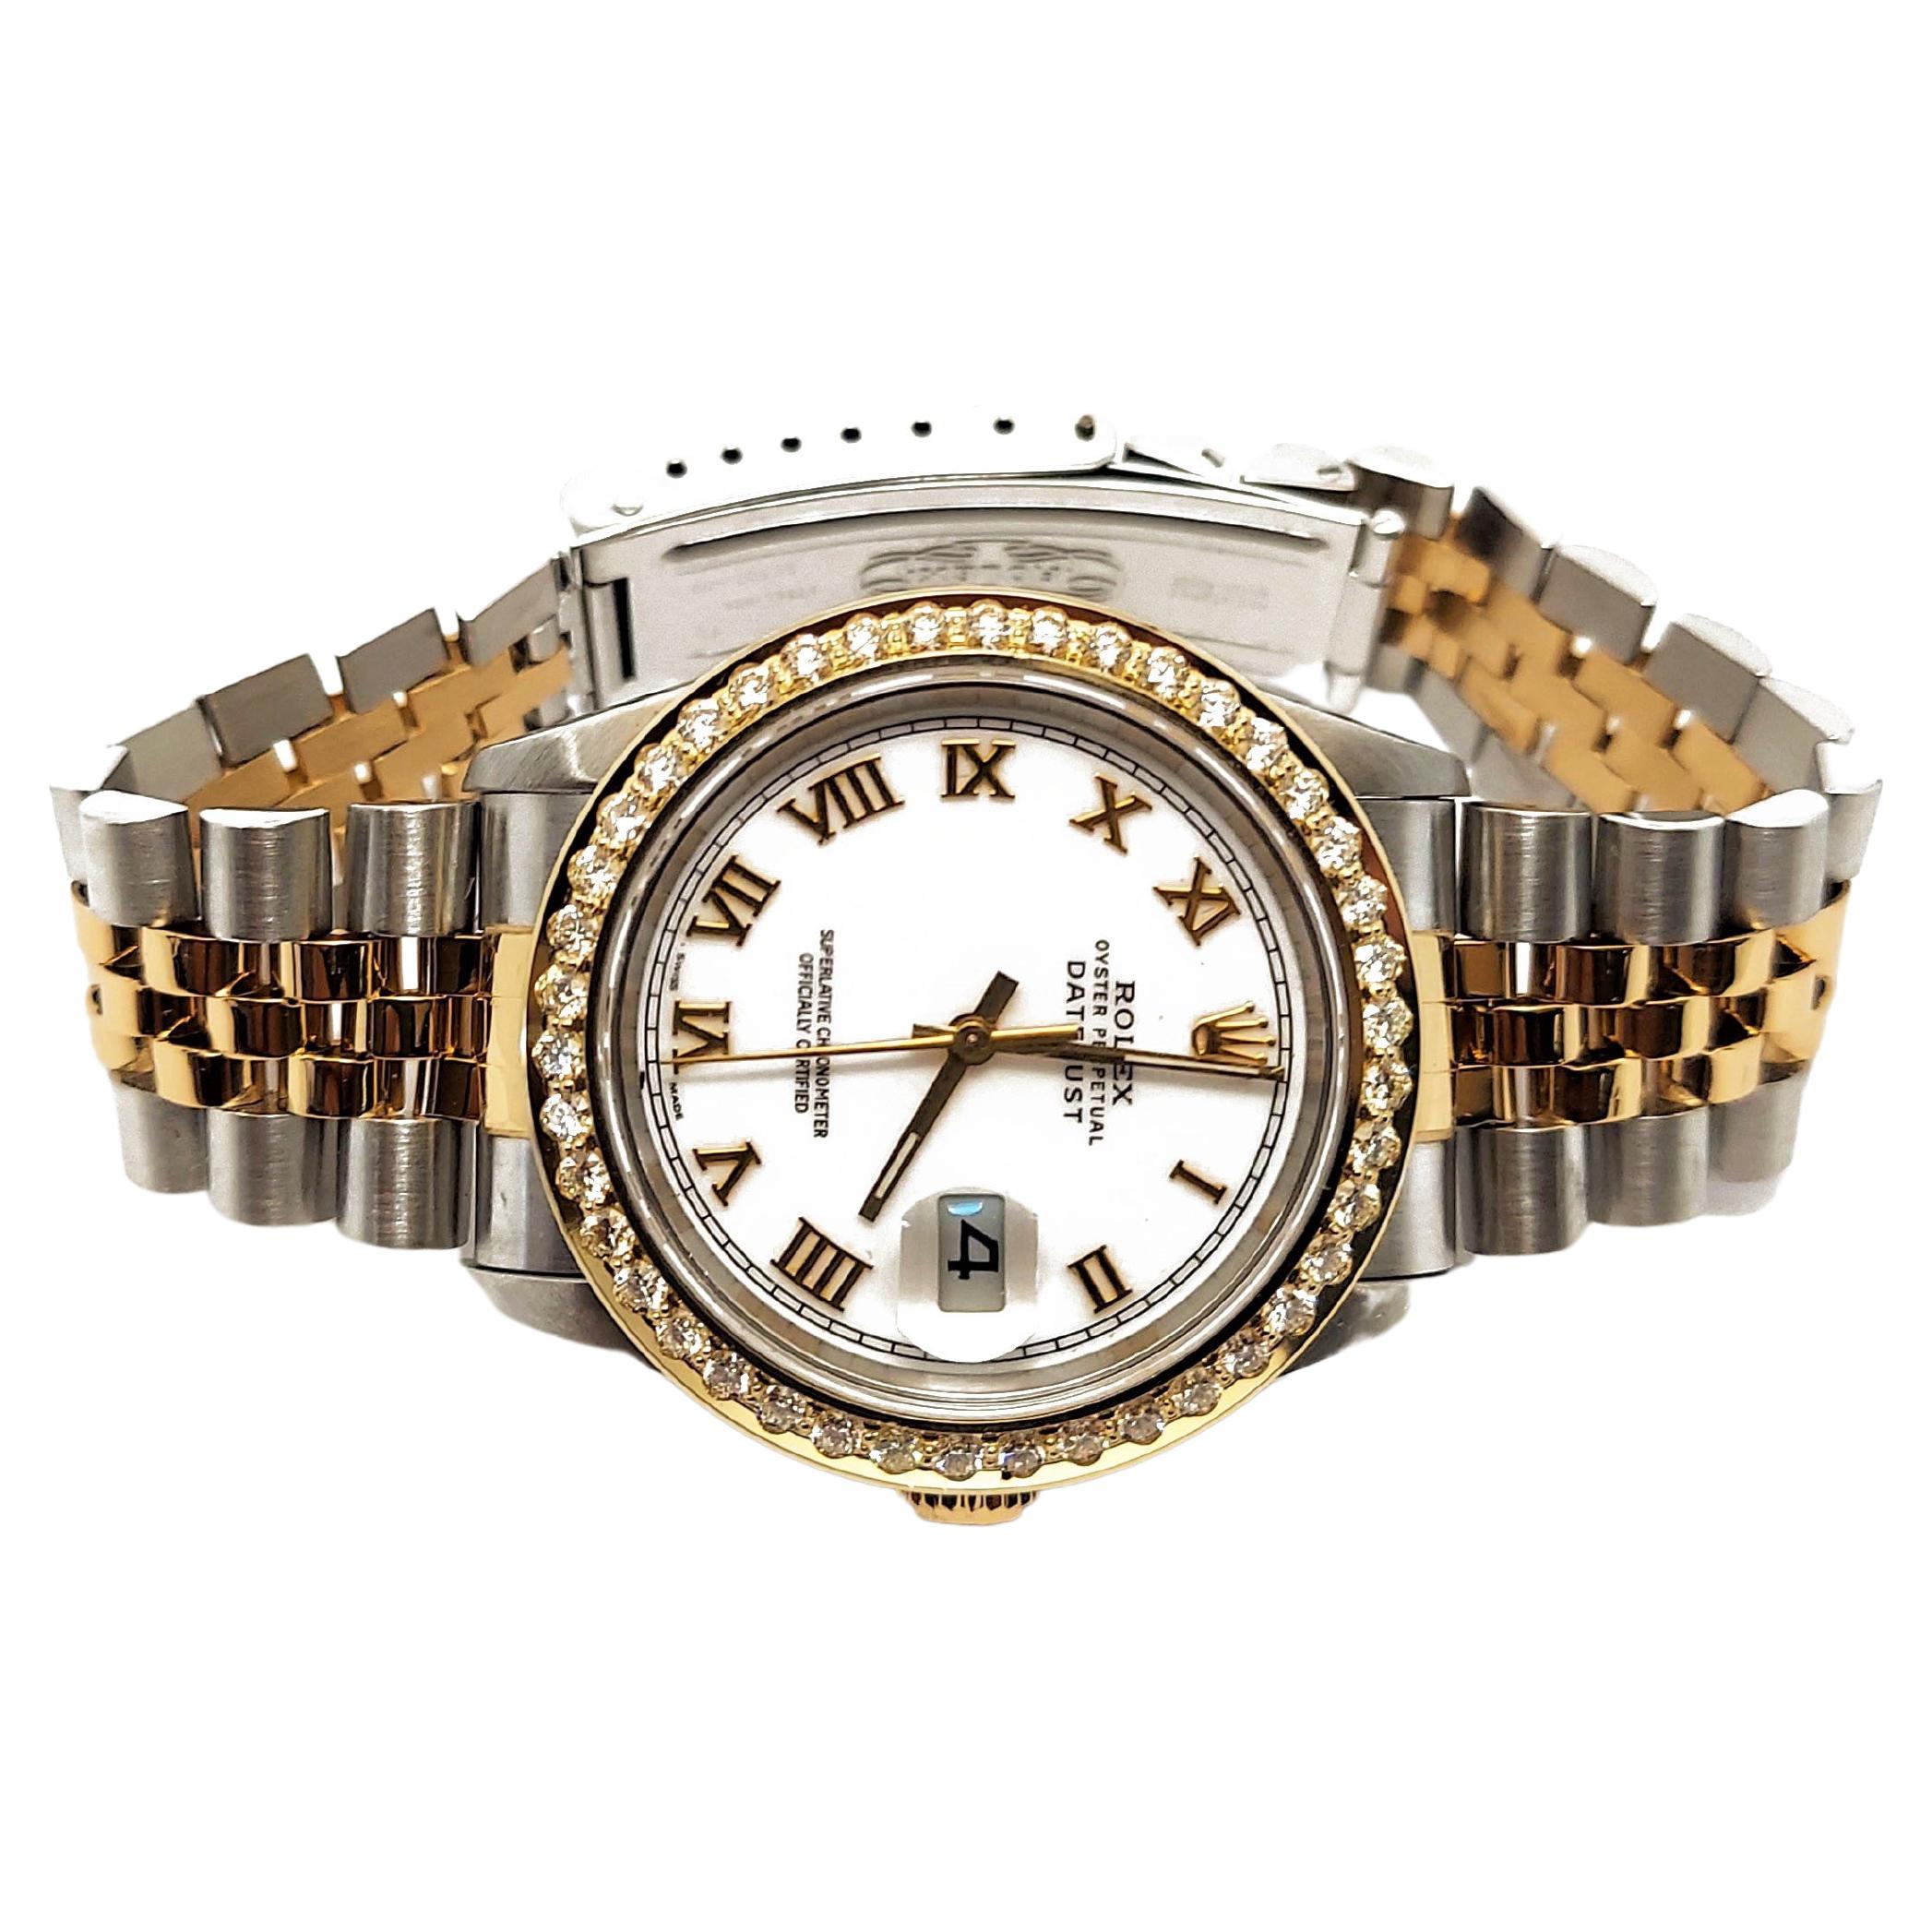 Brand - Rolex
Model - 16233 datejust
Condition - pre owned
Metals - solid gold & stainless steel
Case size - 36 mm
Bezel - yellow gold diamond
Crystal - sapphire
Movement - automatic caliber 3135
Dial - roman numeral
Wrist band - two tone